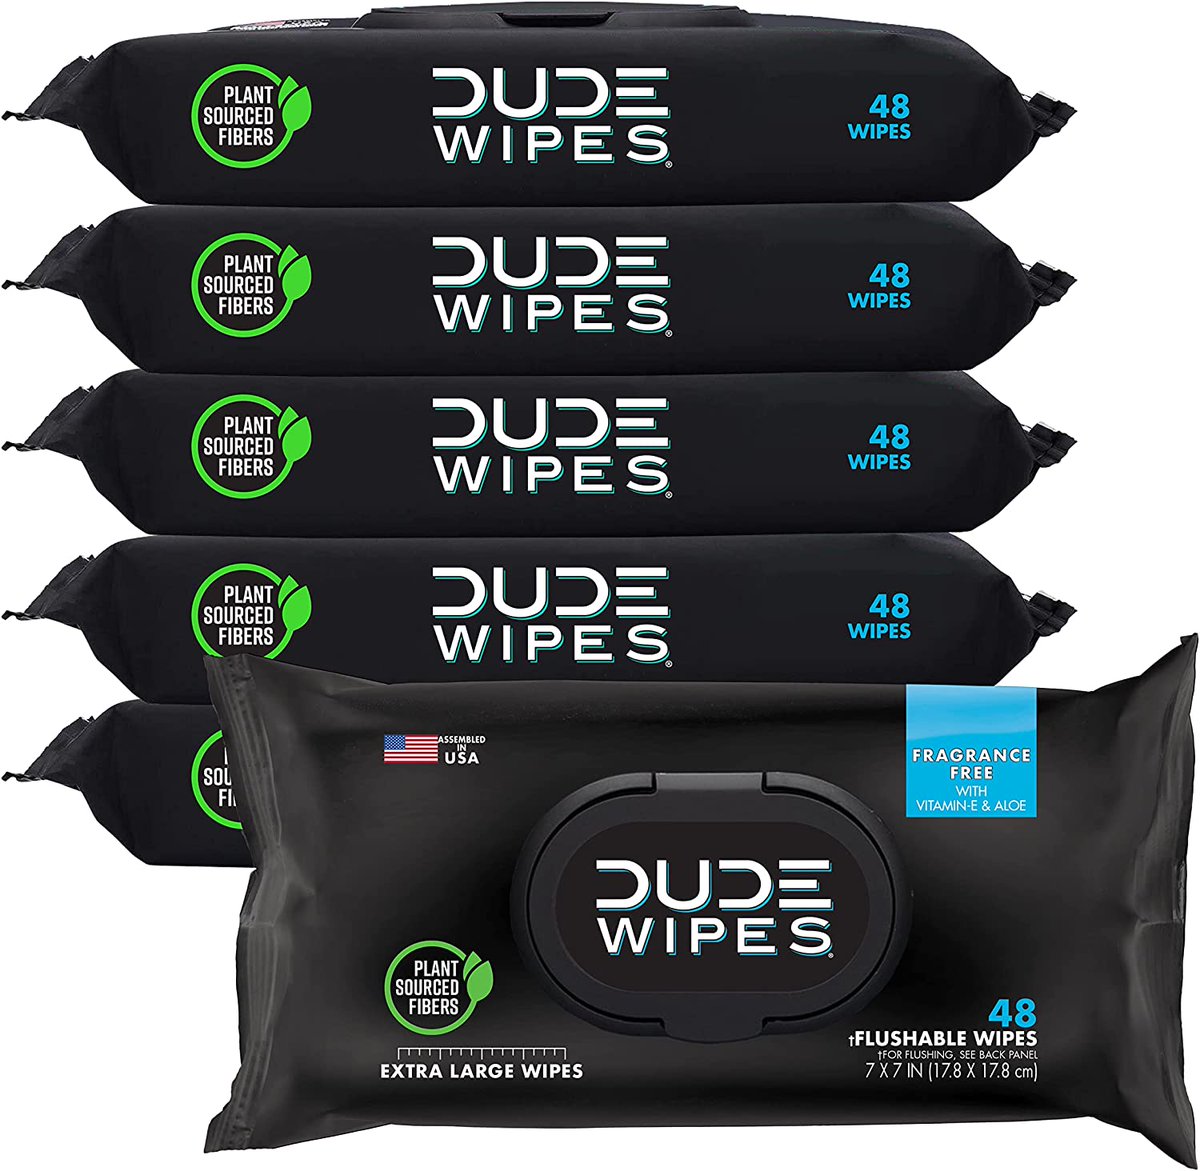 DUDE Wipes Flushable Wipes! 

I am buying these for the boys!!! 

amzn.to/3KRcCas

 #dudewipes #buttwipes #mensproducts #trending #amazonfind #6pack #dude #productsformen #fathersday #newdad #giftfornewdad